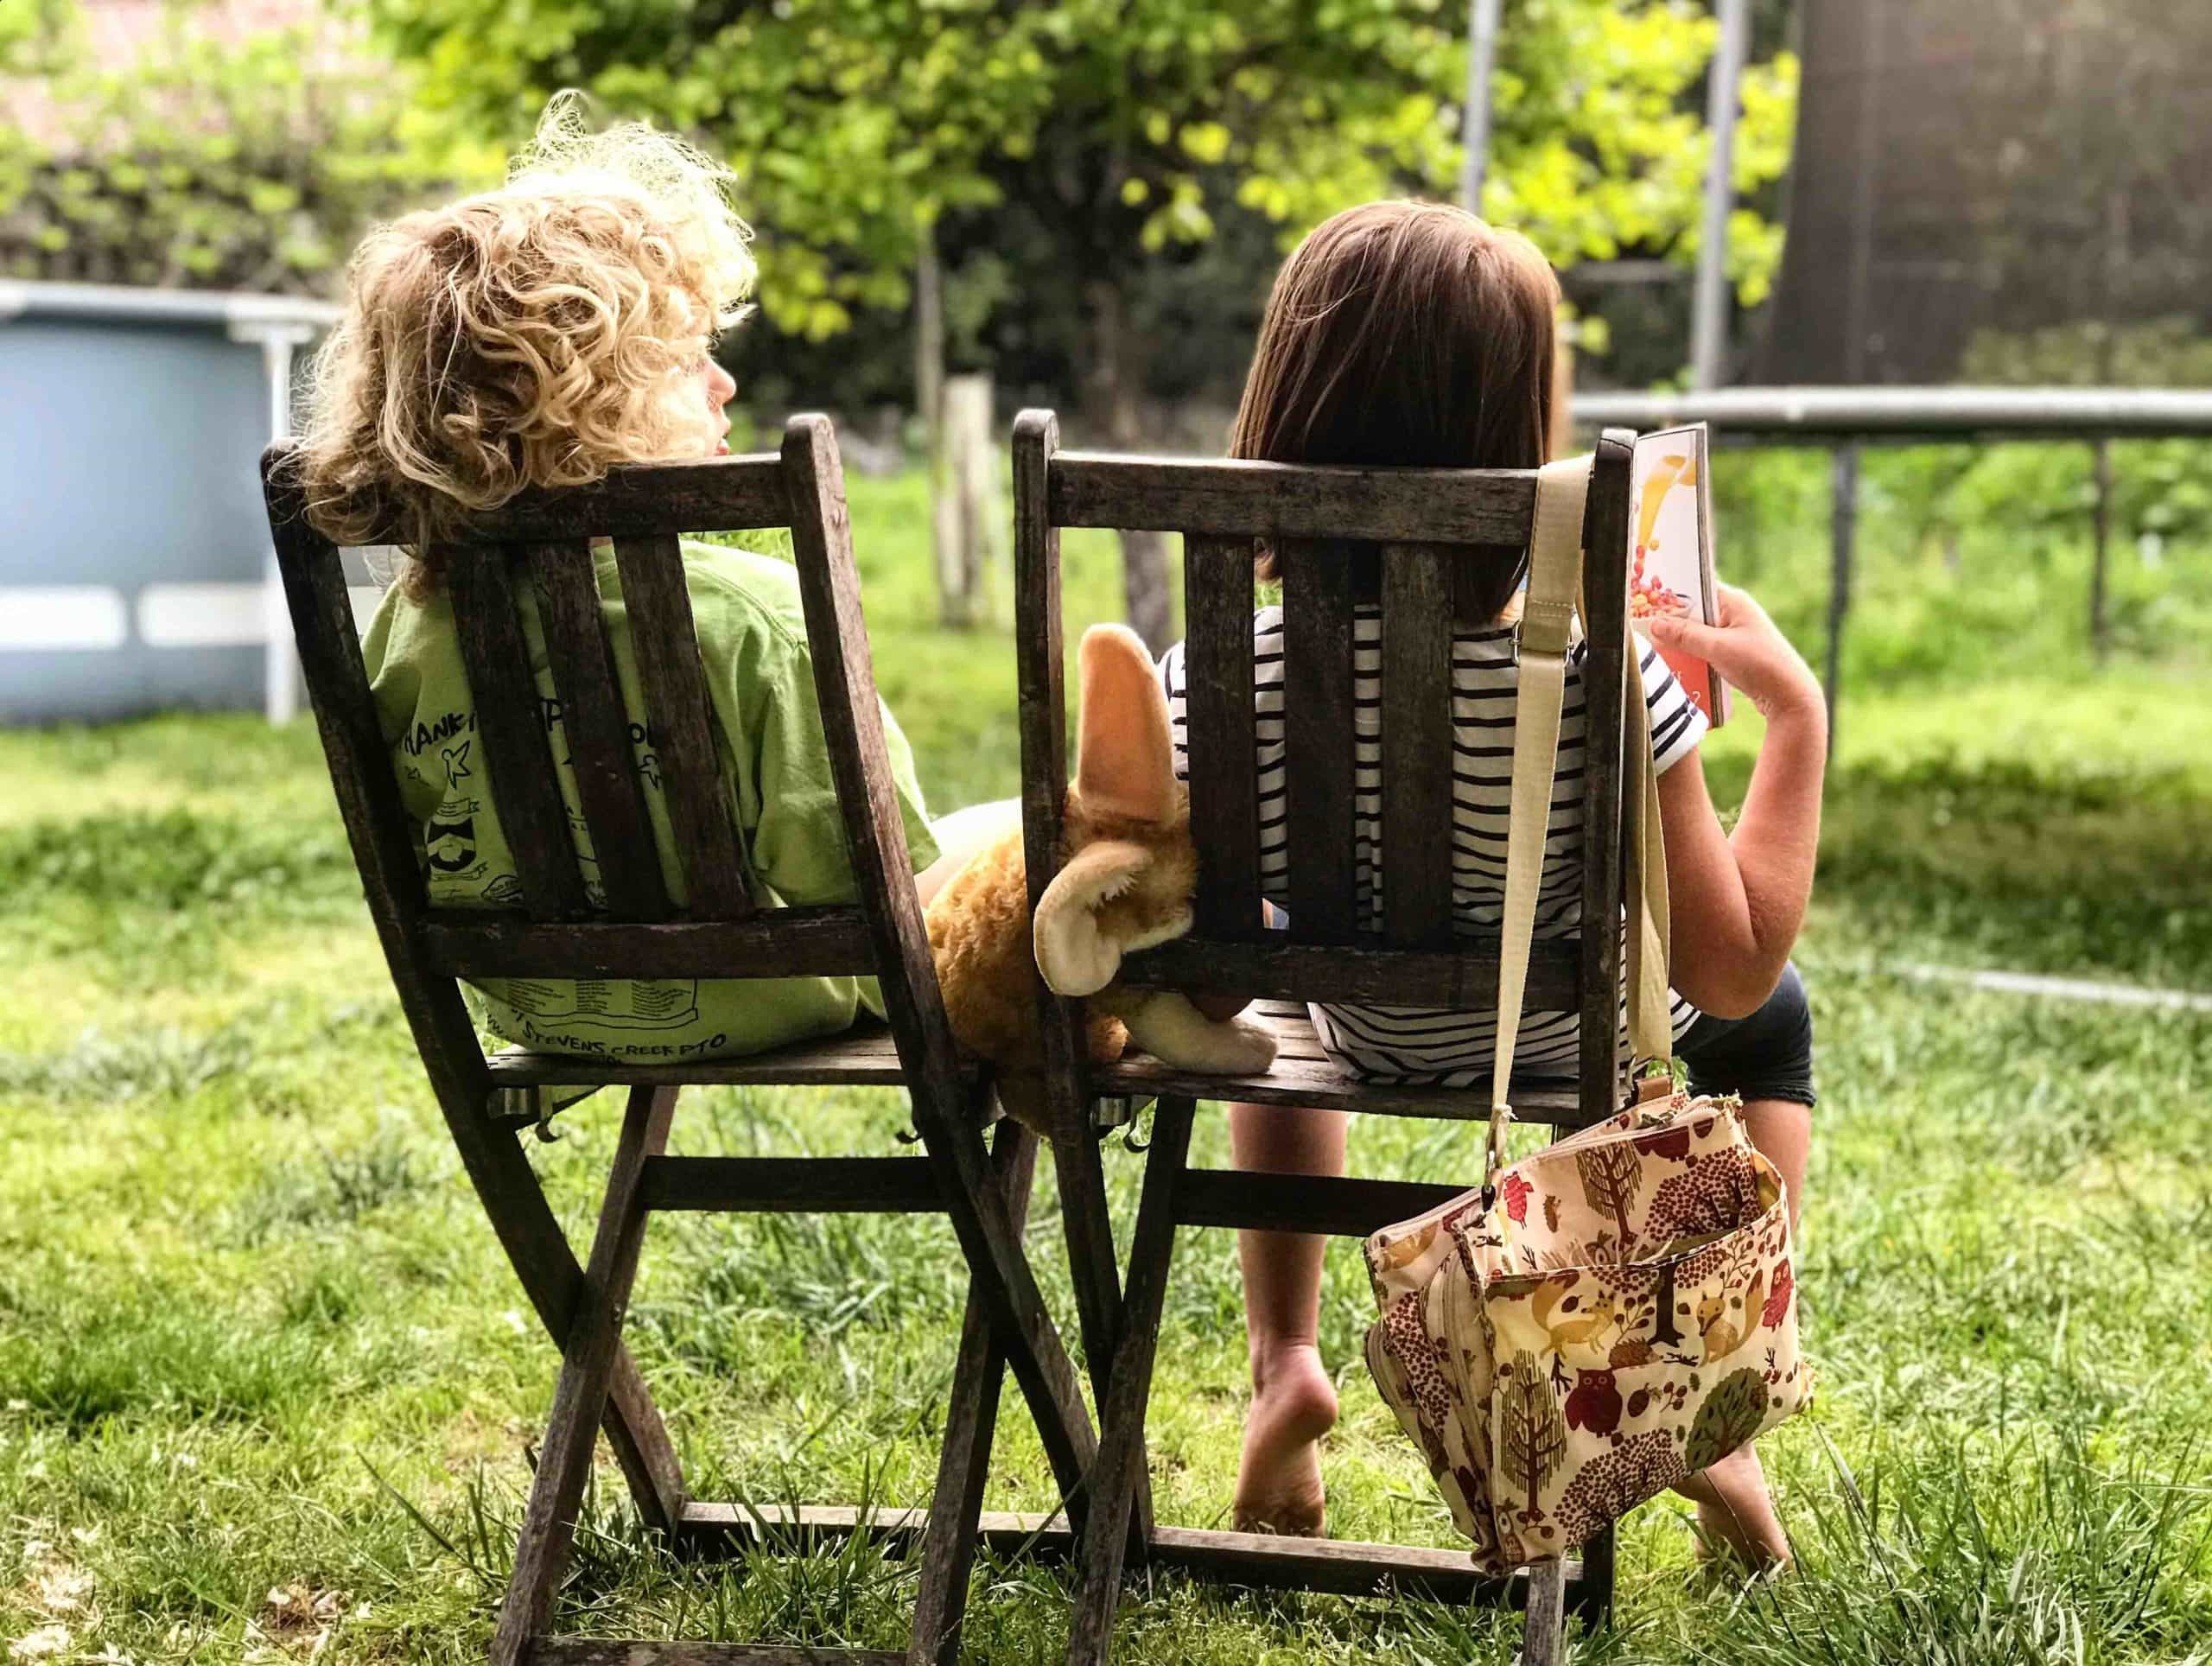 Two children sit on chairs next to each other in the garden. The young boy is talking to the young girl who is reading a book.